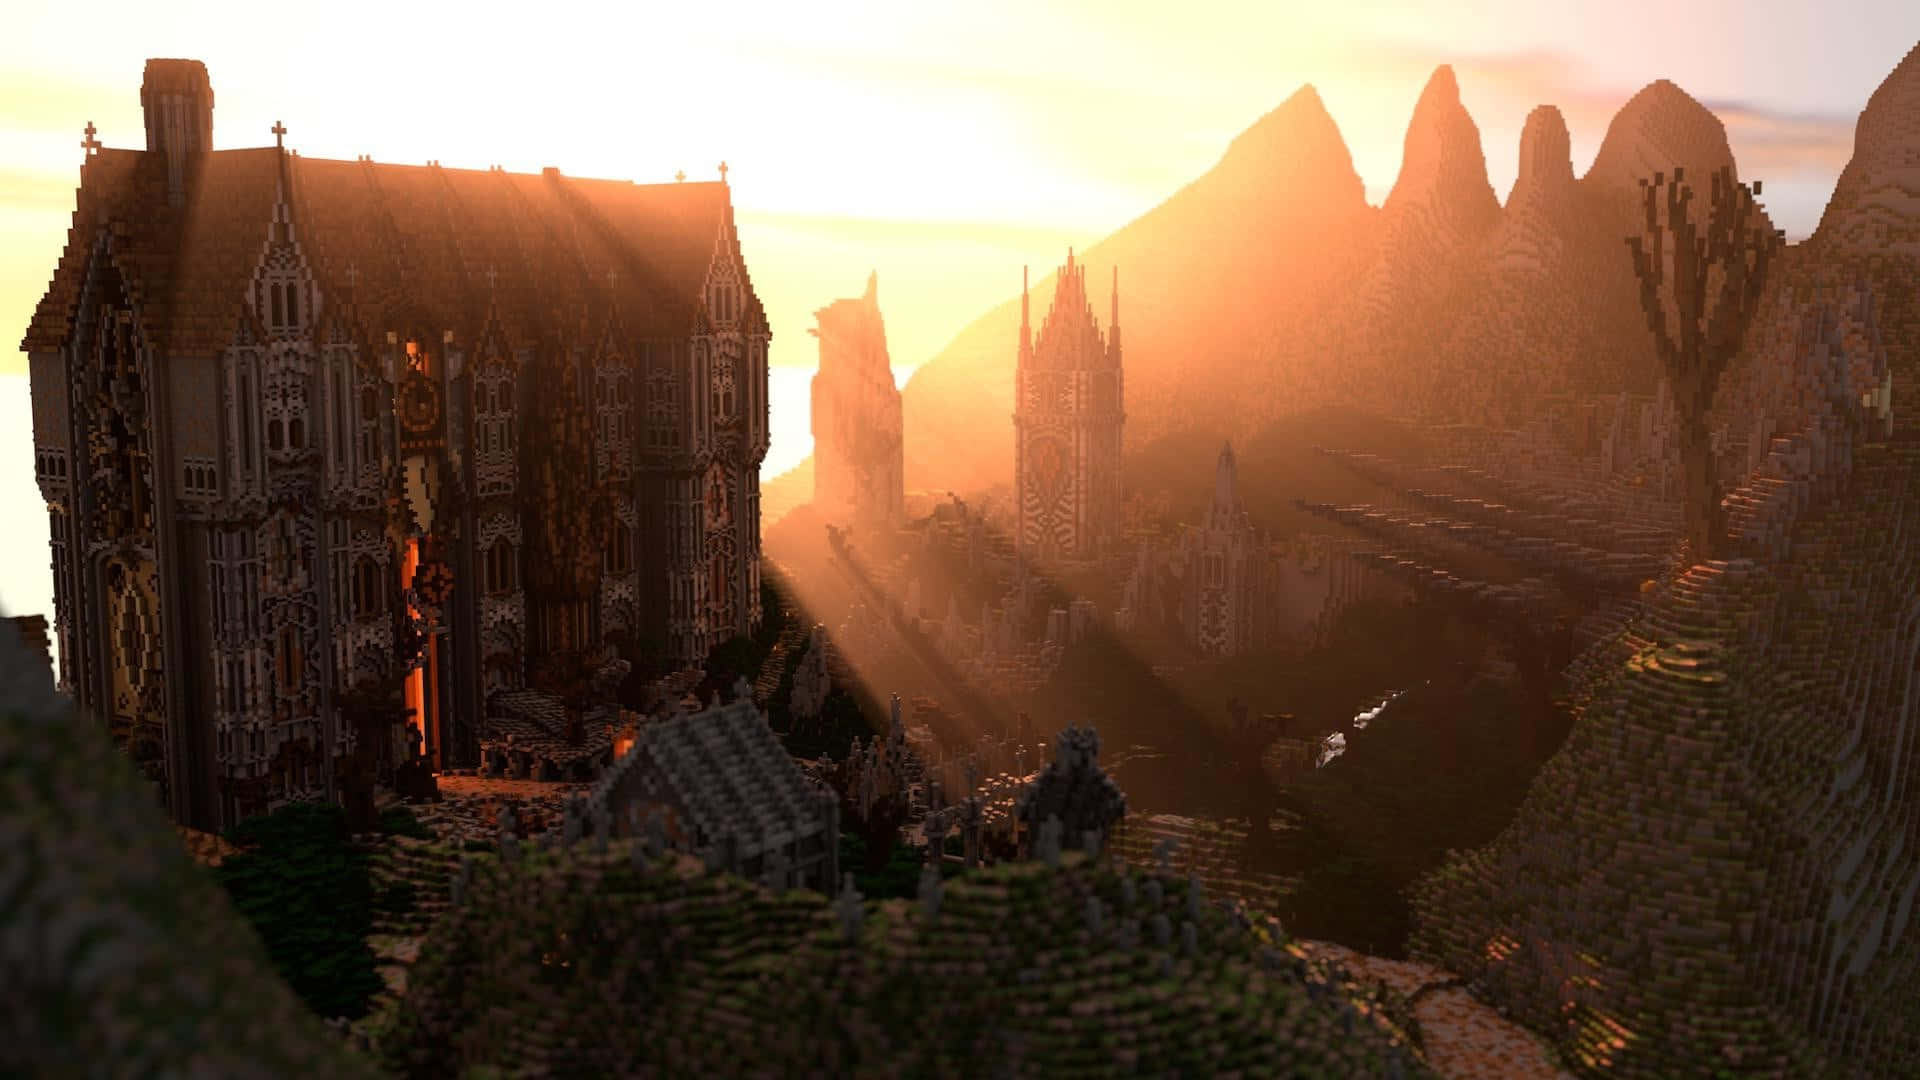 Take in the beauty of a Minecraft sunset Wallpaper